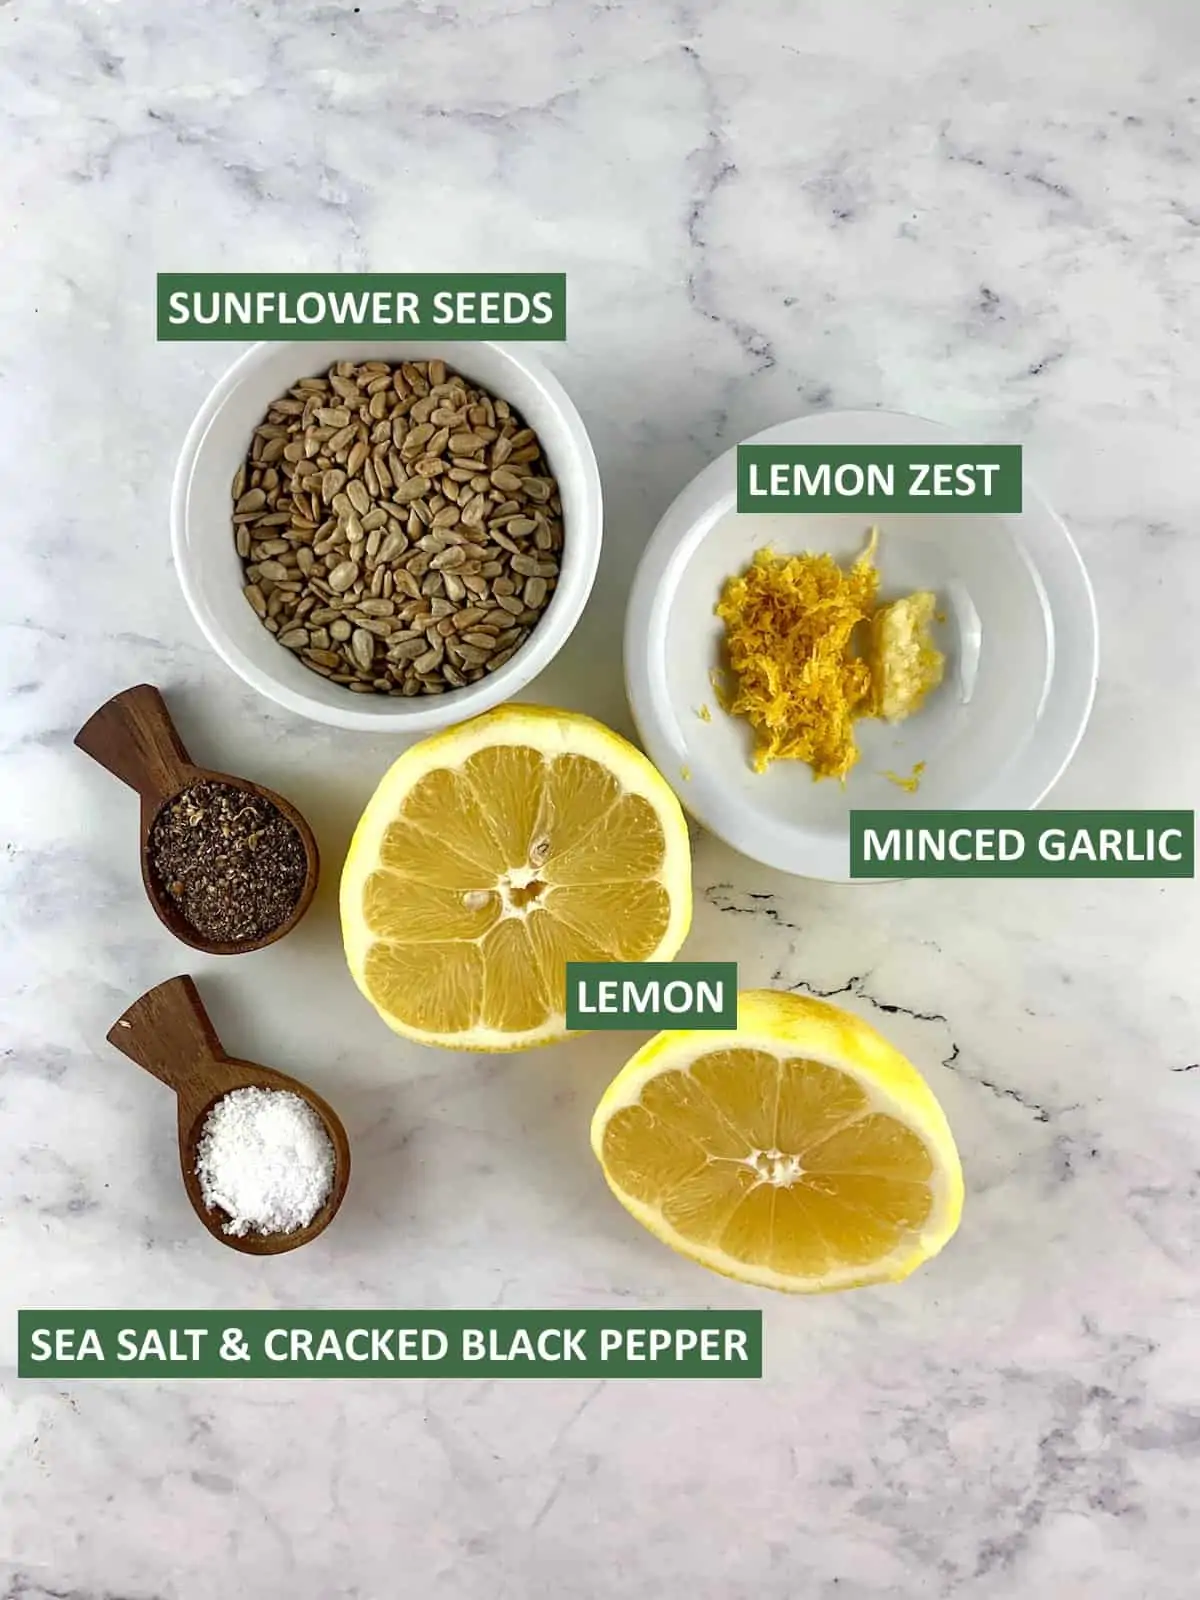 INGREDIENTS NEEDED FOR SUNFLOWER SEED DRESSING